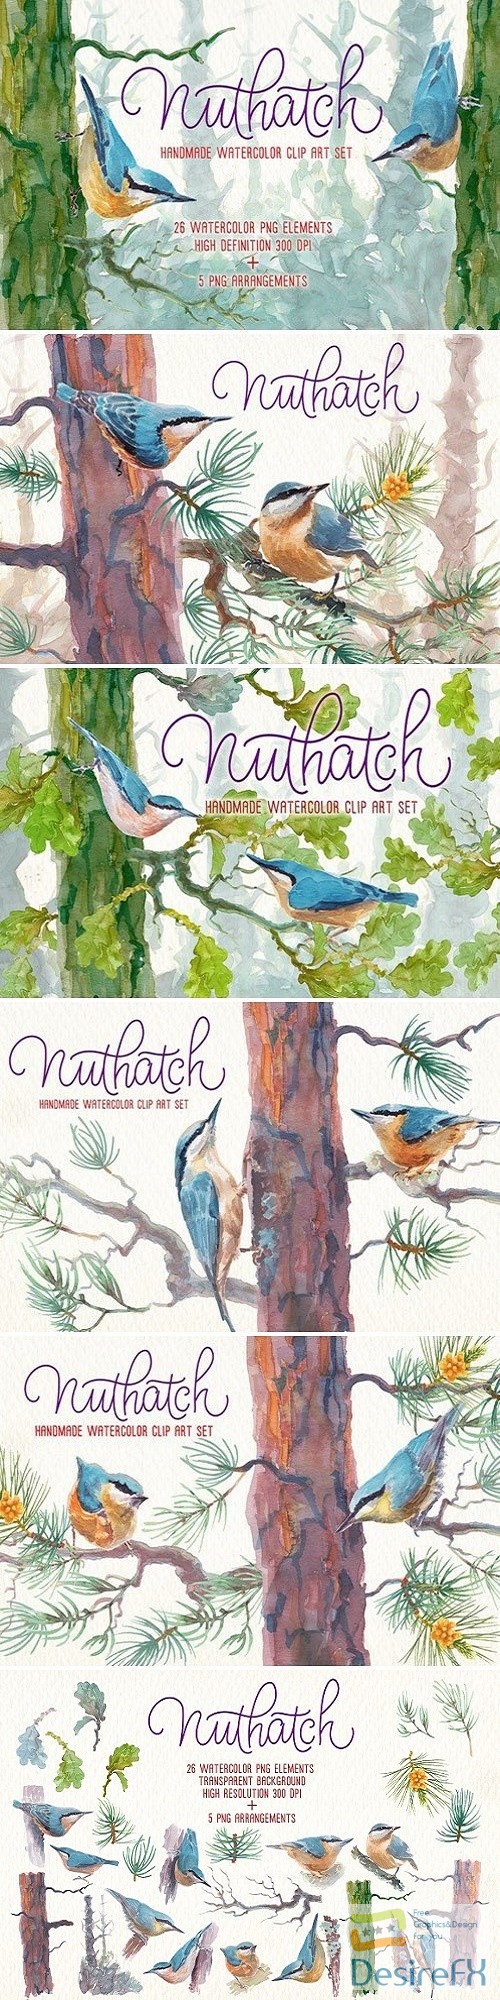 Nuthatch watercolor clipart set 2457736